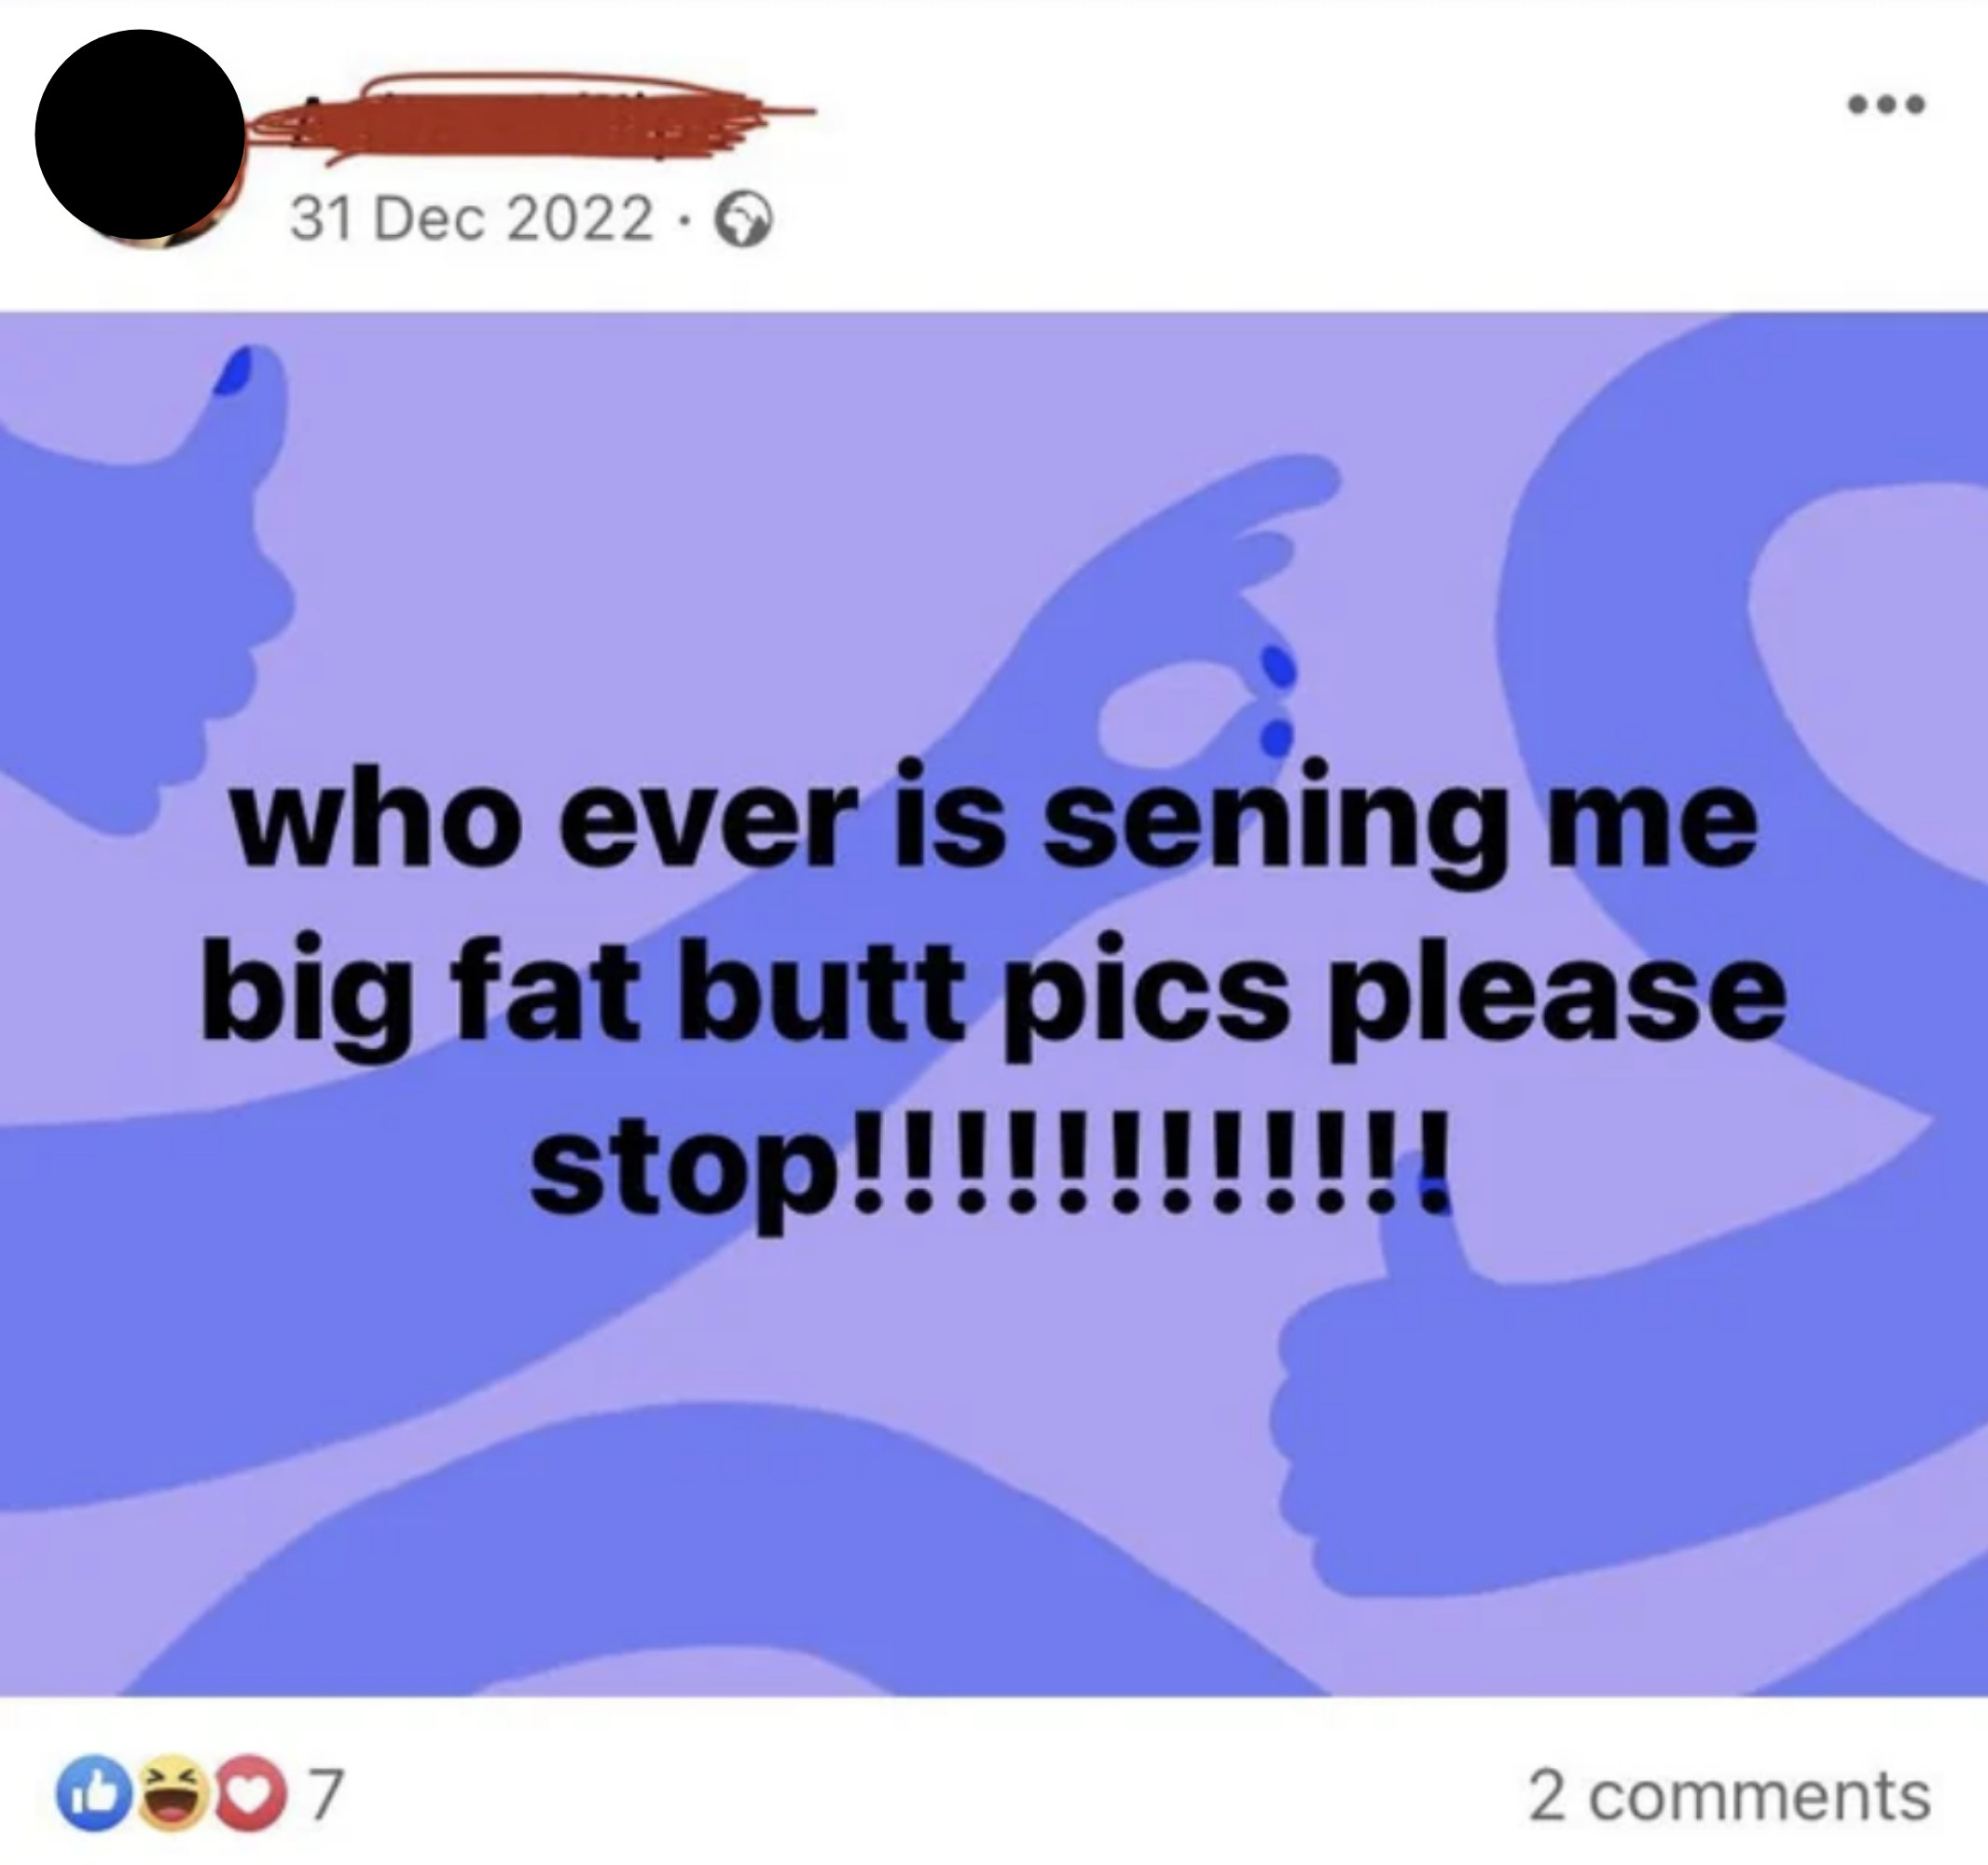 whoever is sending me big fat butt pics please stop